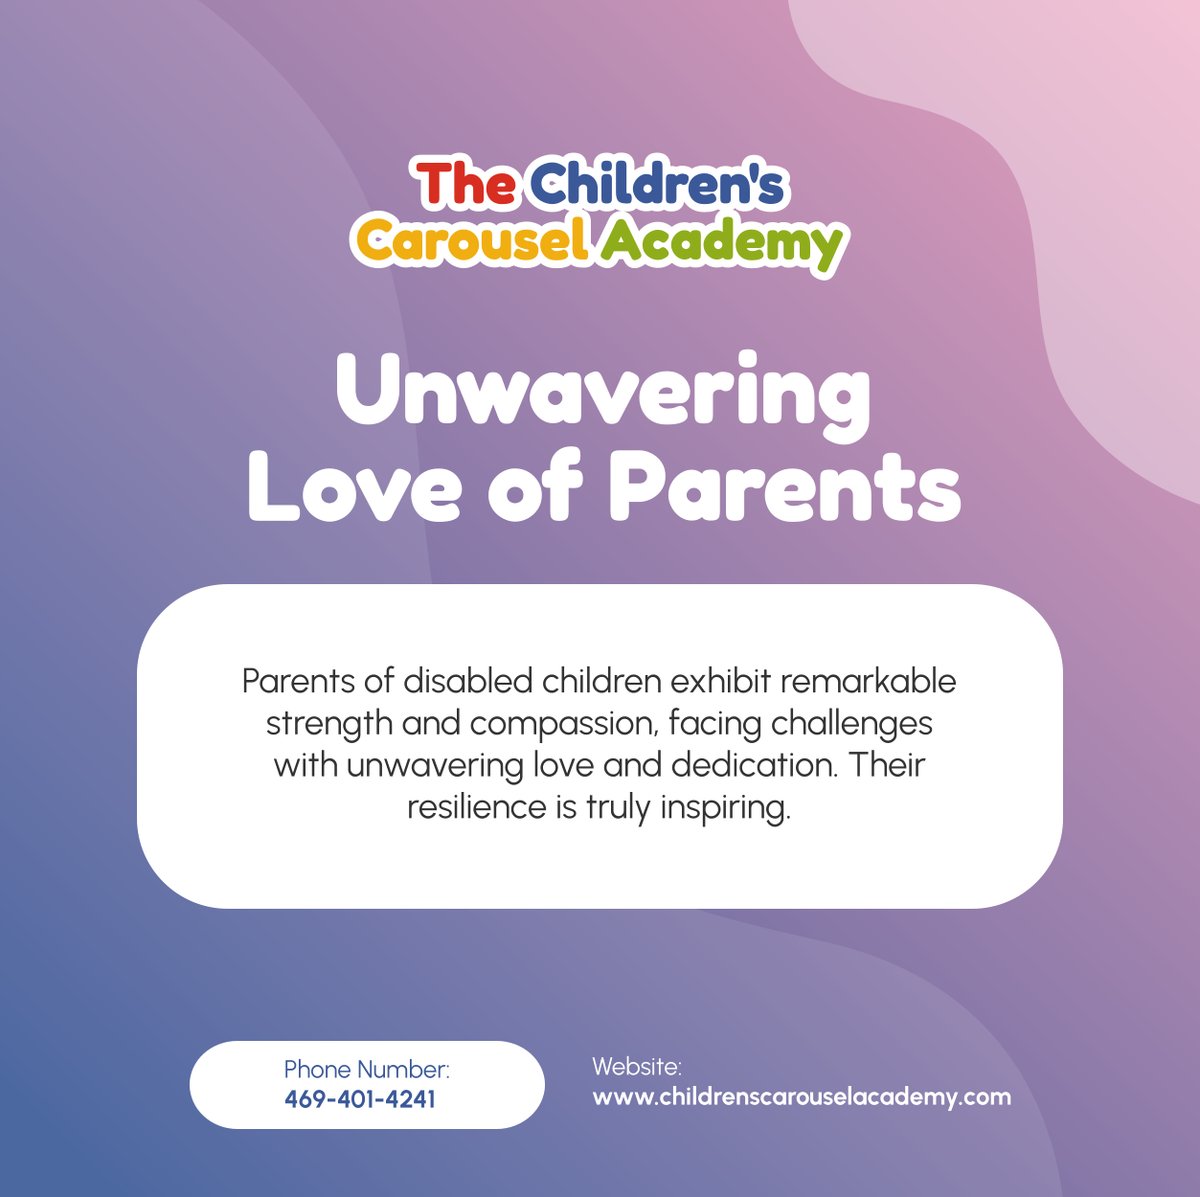 Celebrate the resilience and love of these unsung heroes—the parents of disabled children. Their dedication inspires us all.

#UnwaveringLove #ResilientParents #TutoringServices